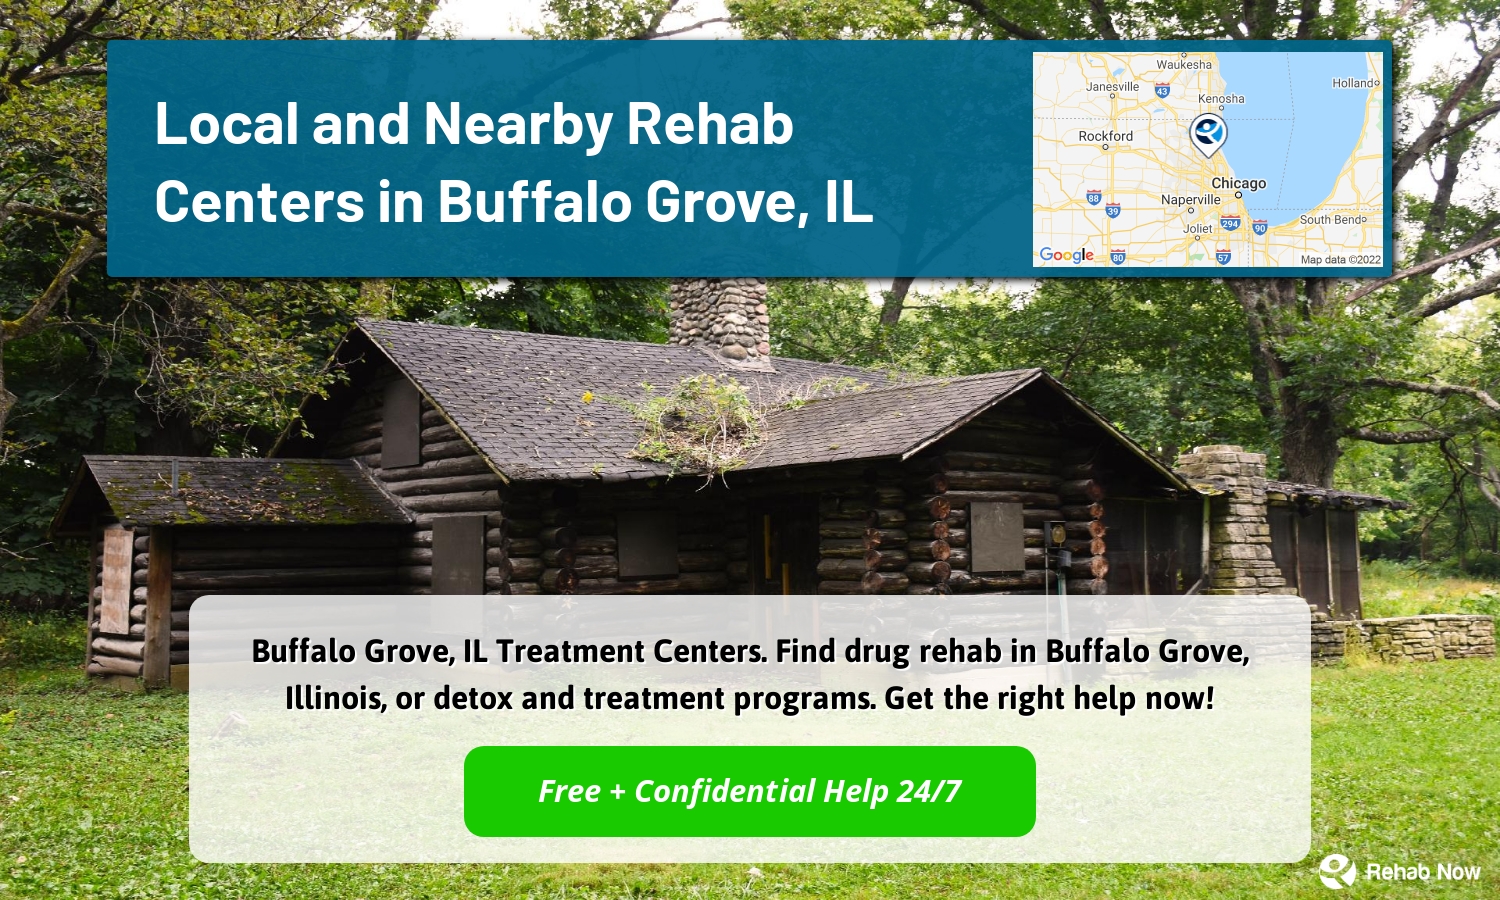 Buffalo Grove, IL Treatment Centers. Find drug rehab in Buffalo Grove, Illinois, or detox and treatment programs. Get the right help now!